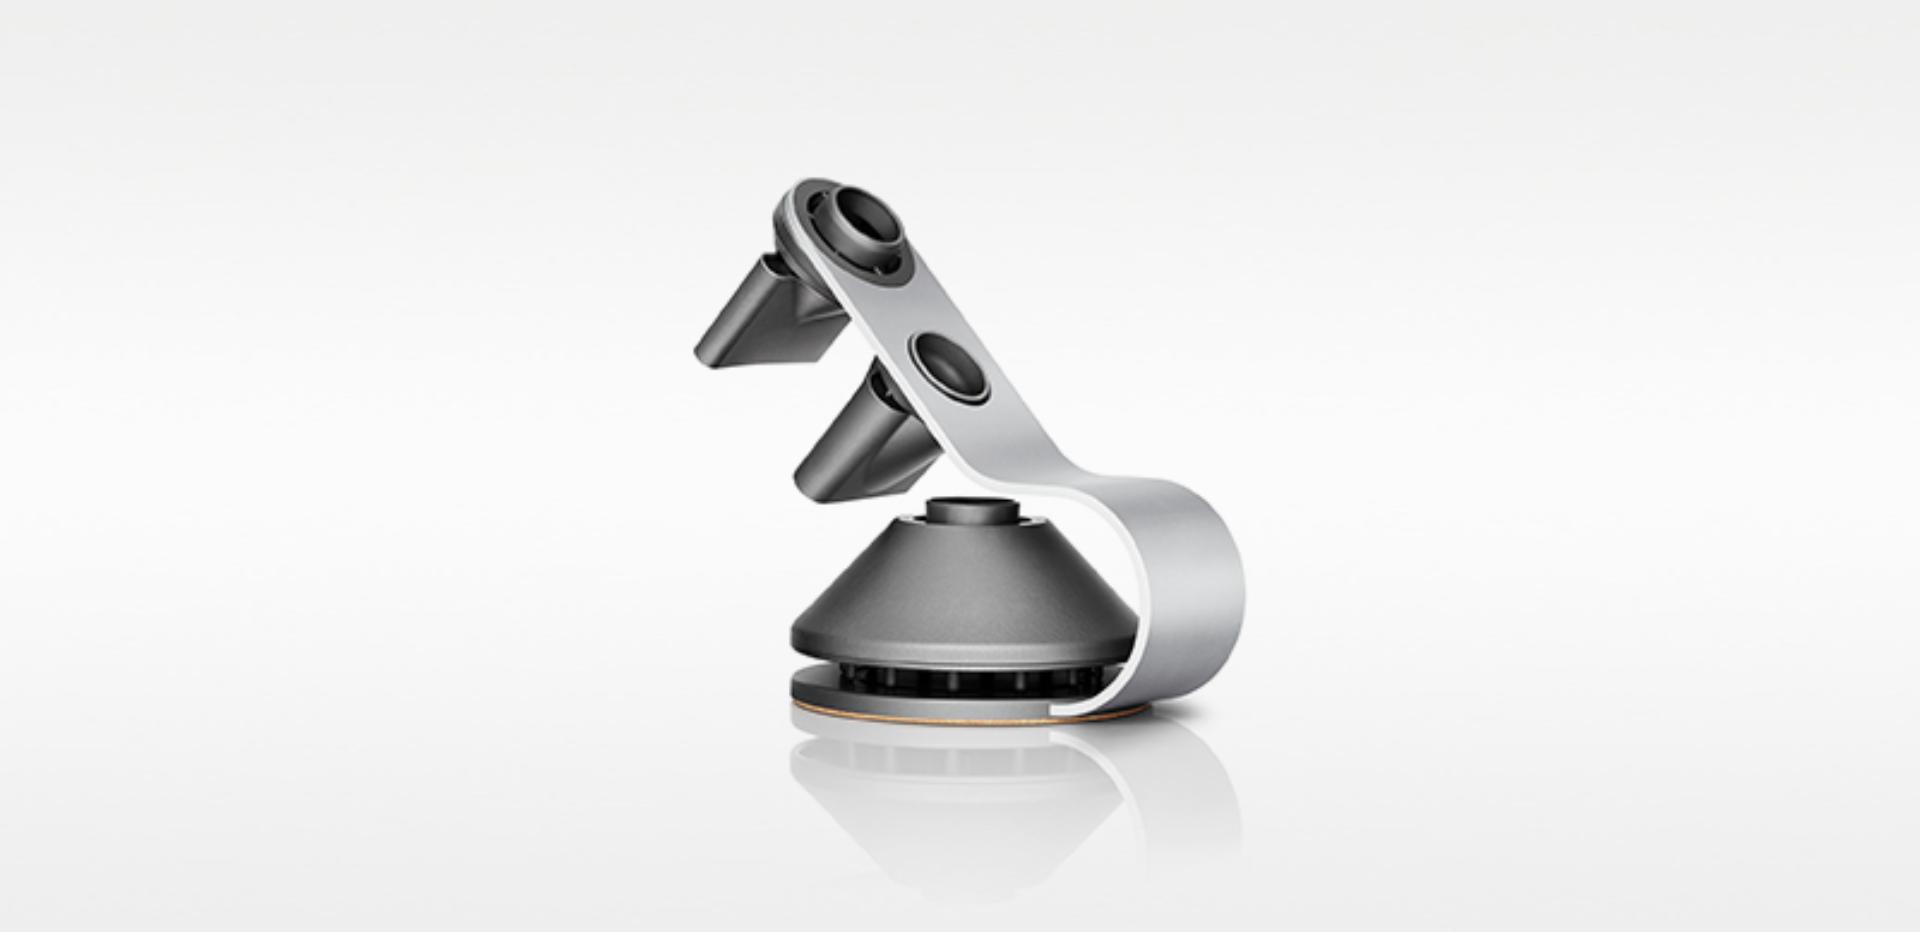 Display stand for the Dyson Supersonic™ hair dryer Professional edition